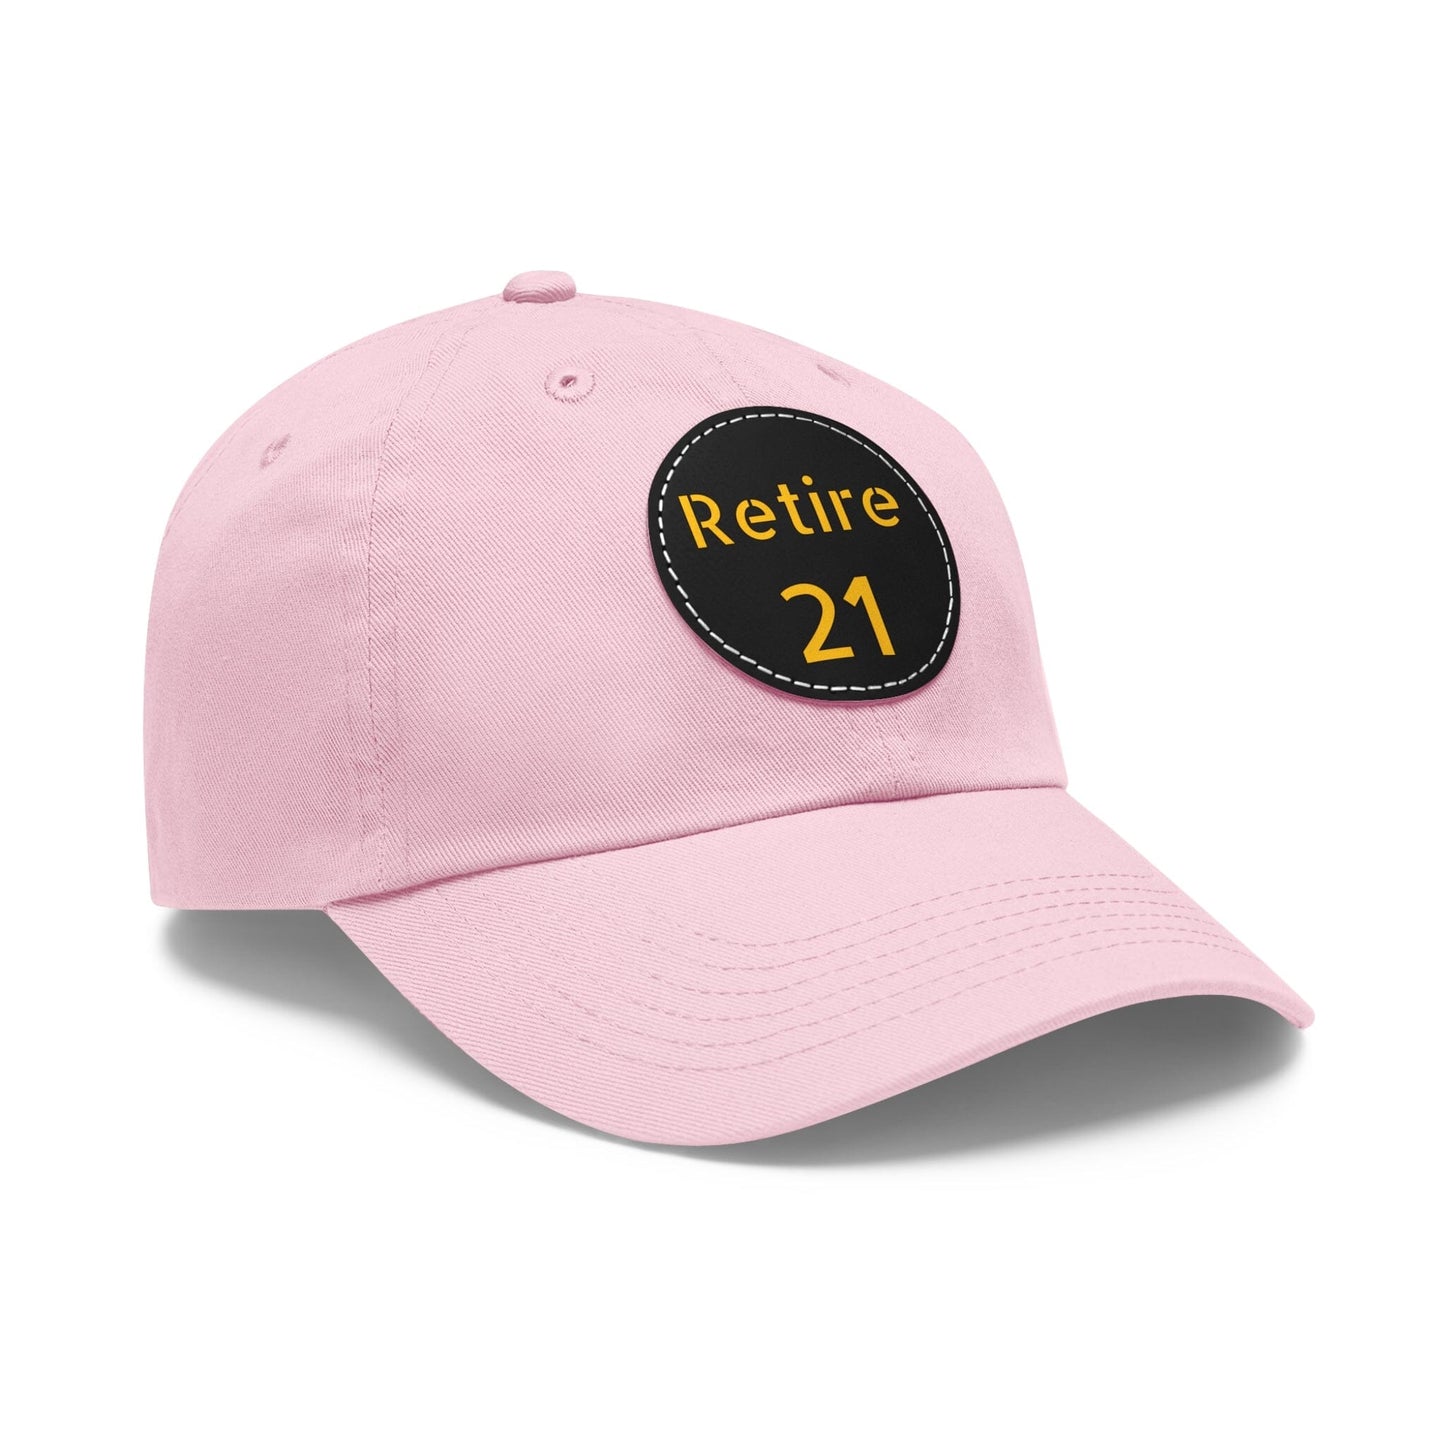 Retire 21 Hat With Leather Patch Hats Yinzergear 